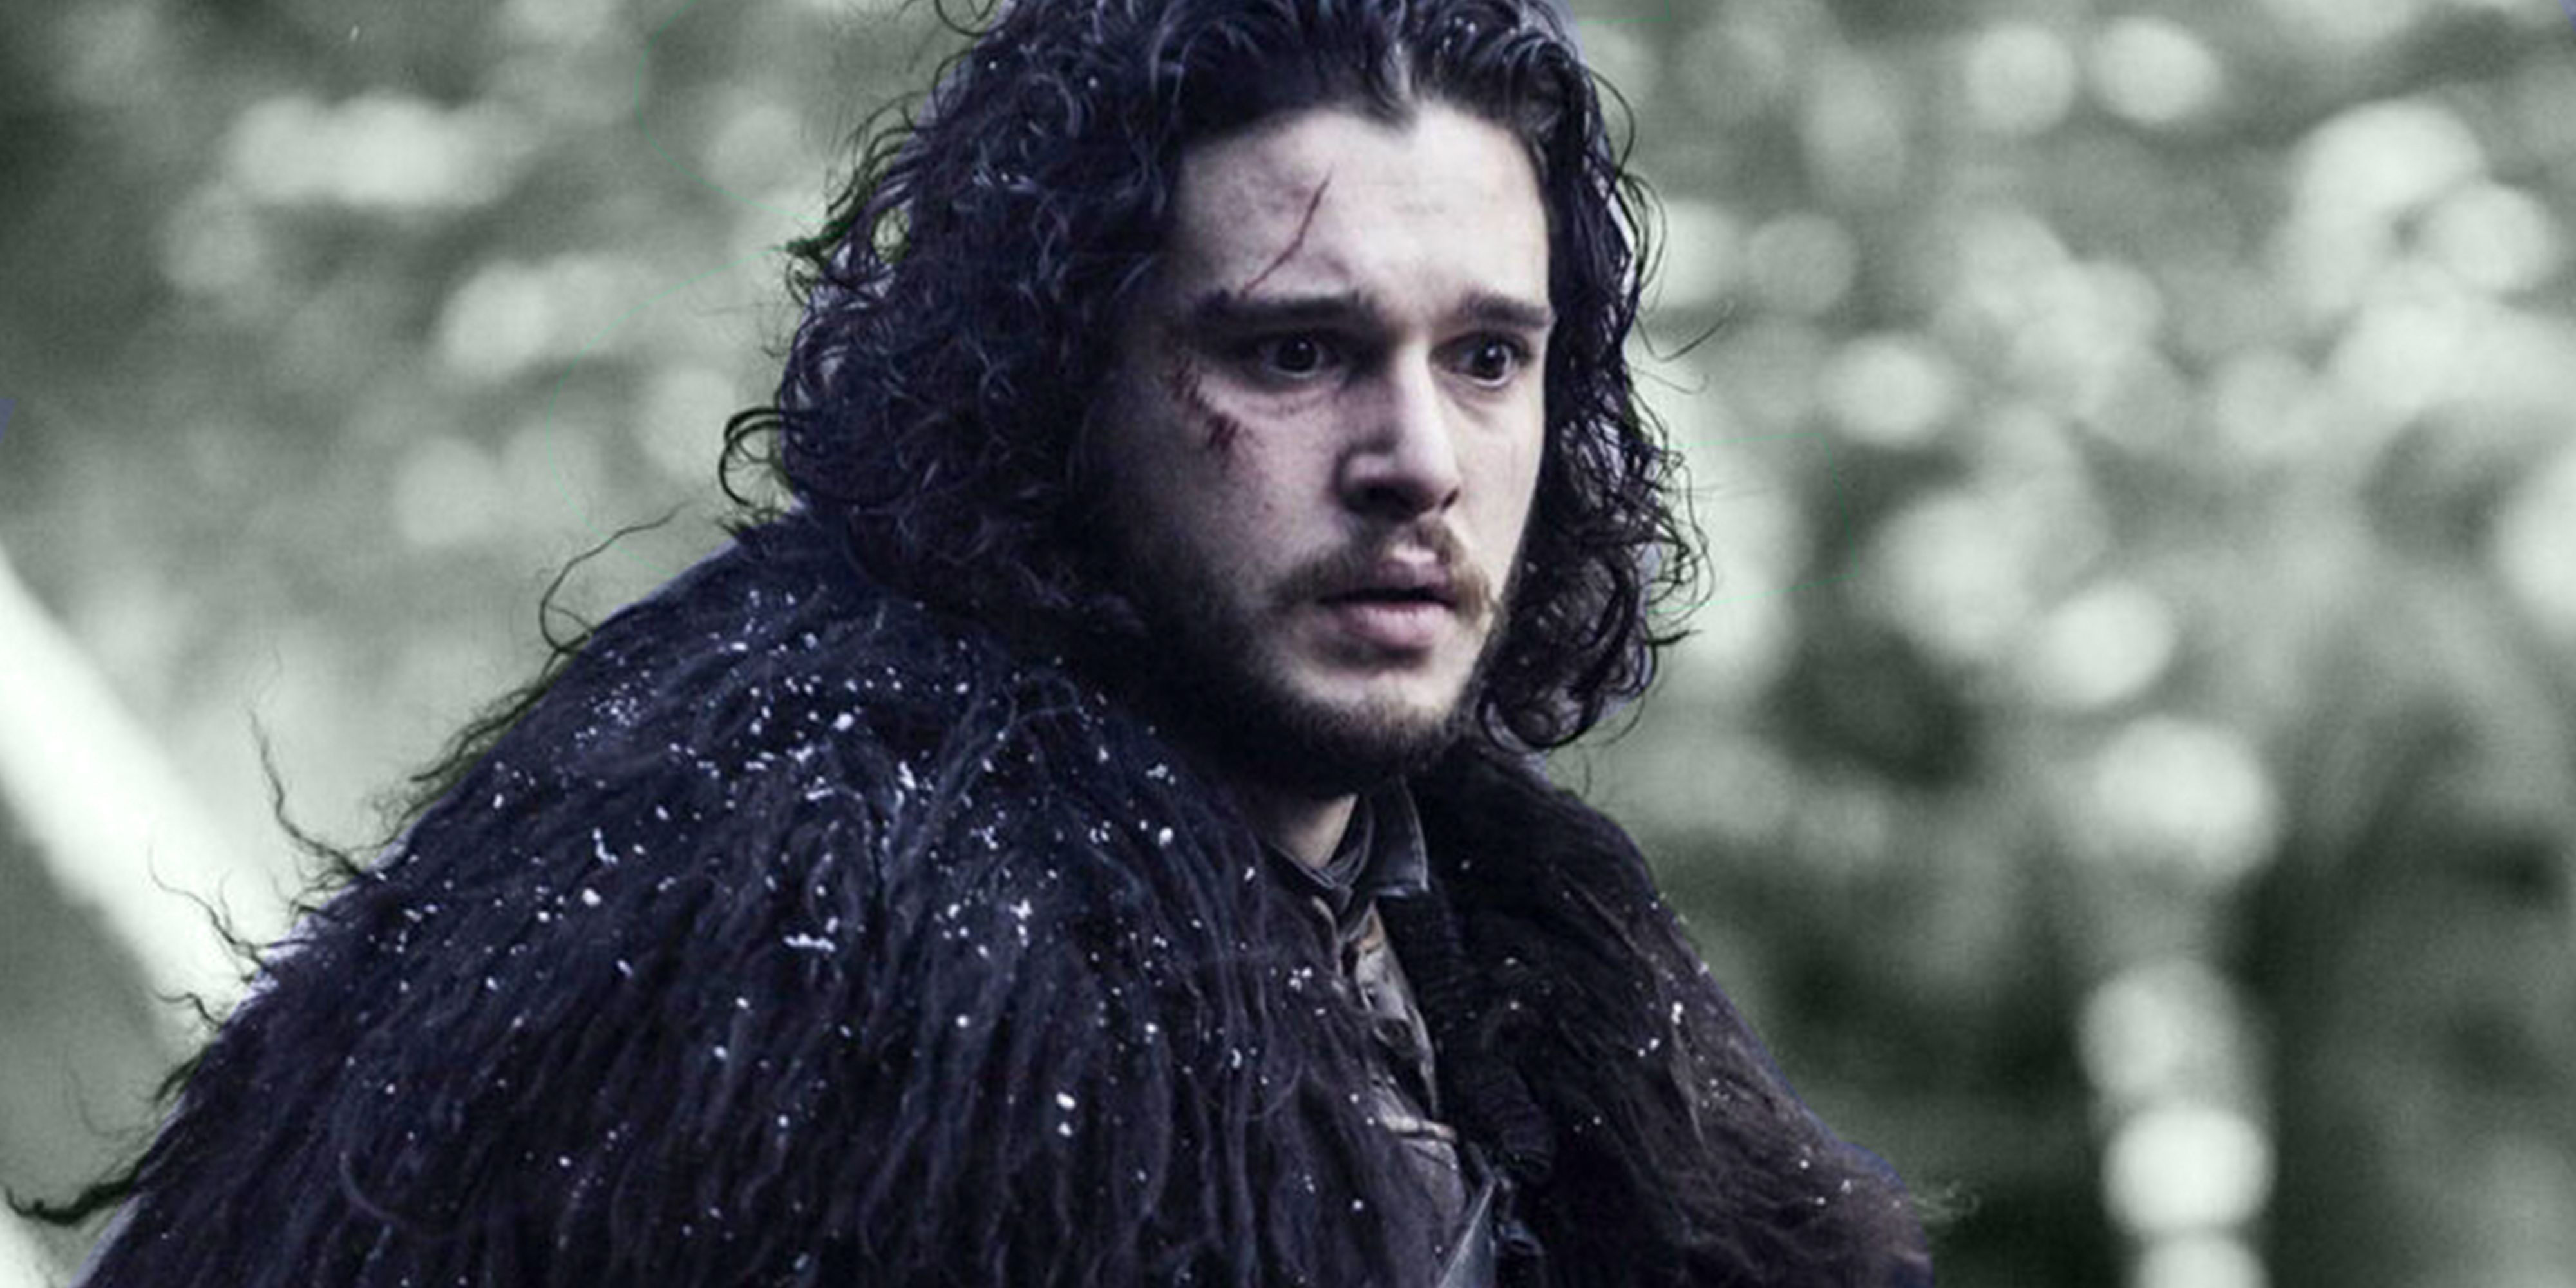 All You Need to Know About the Jon Snow Sequel Series to 'Game of